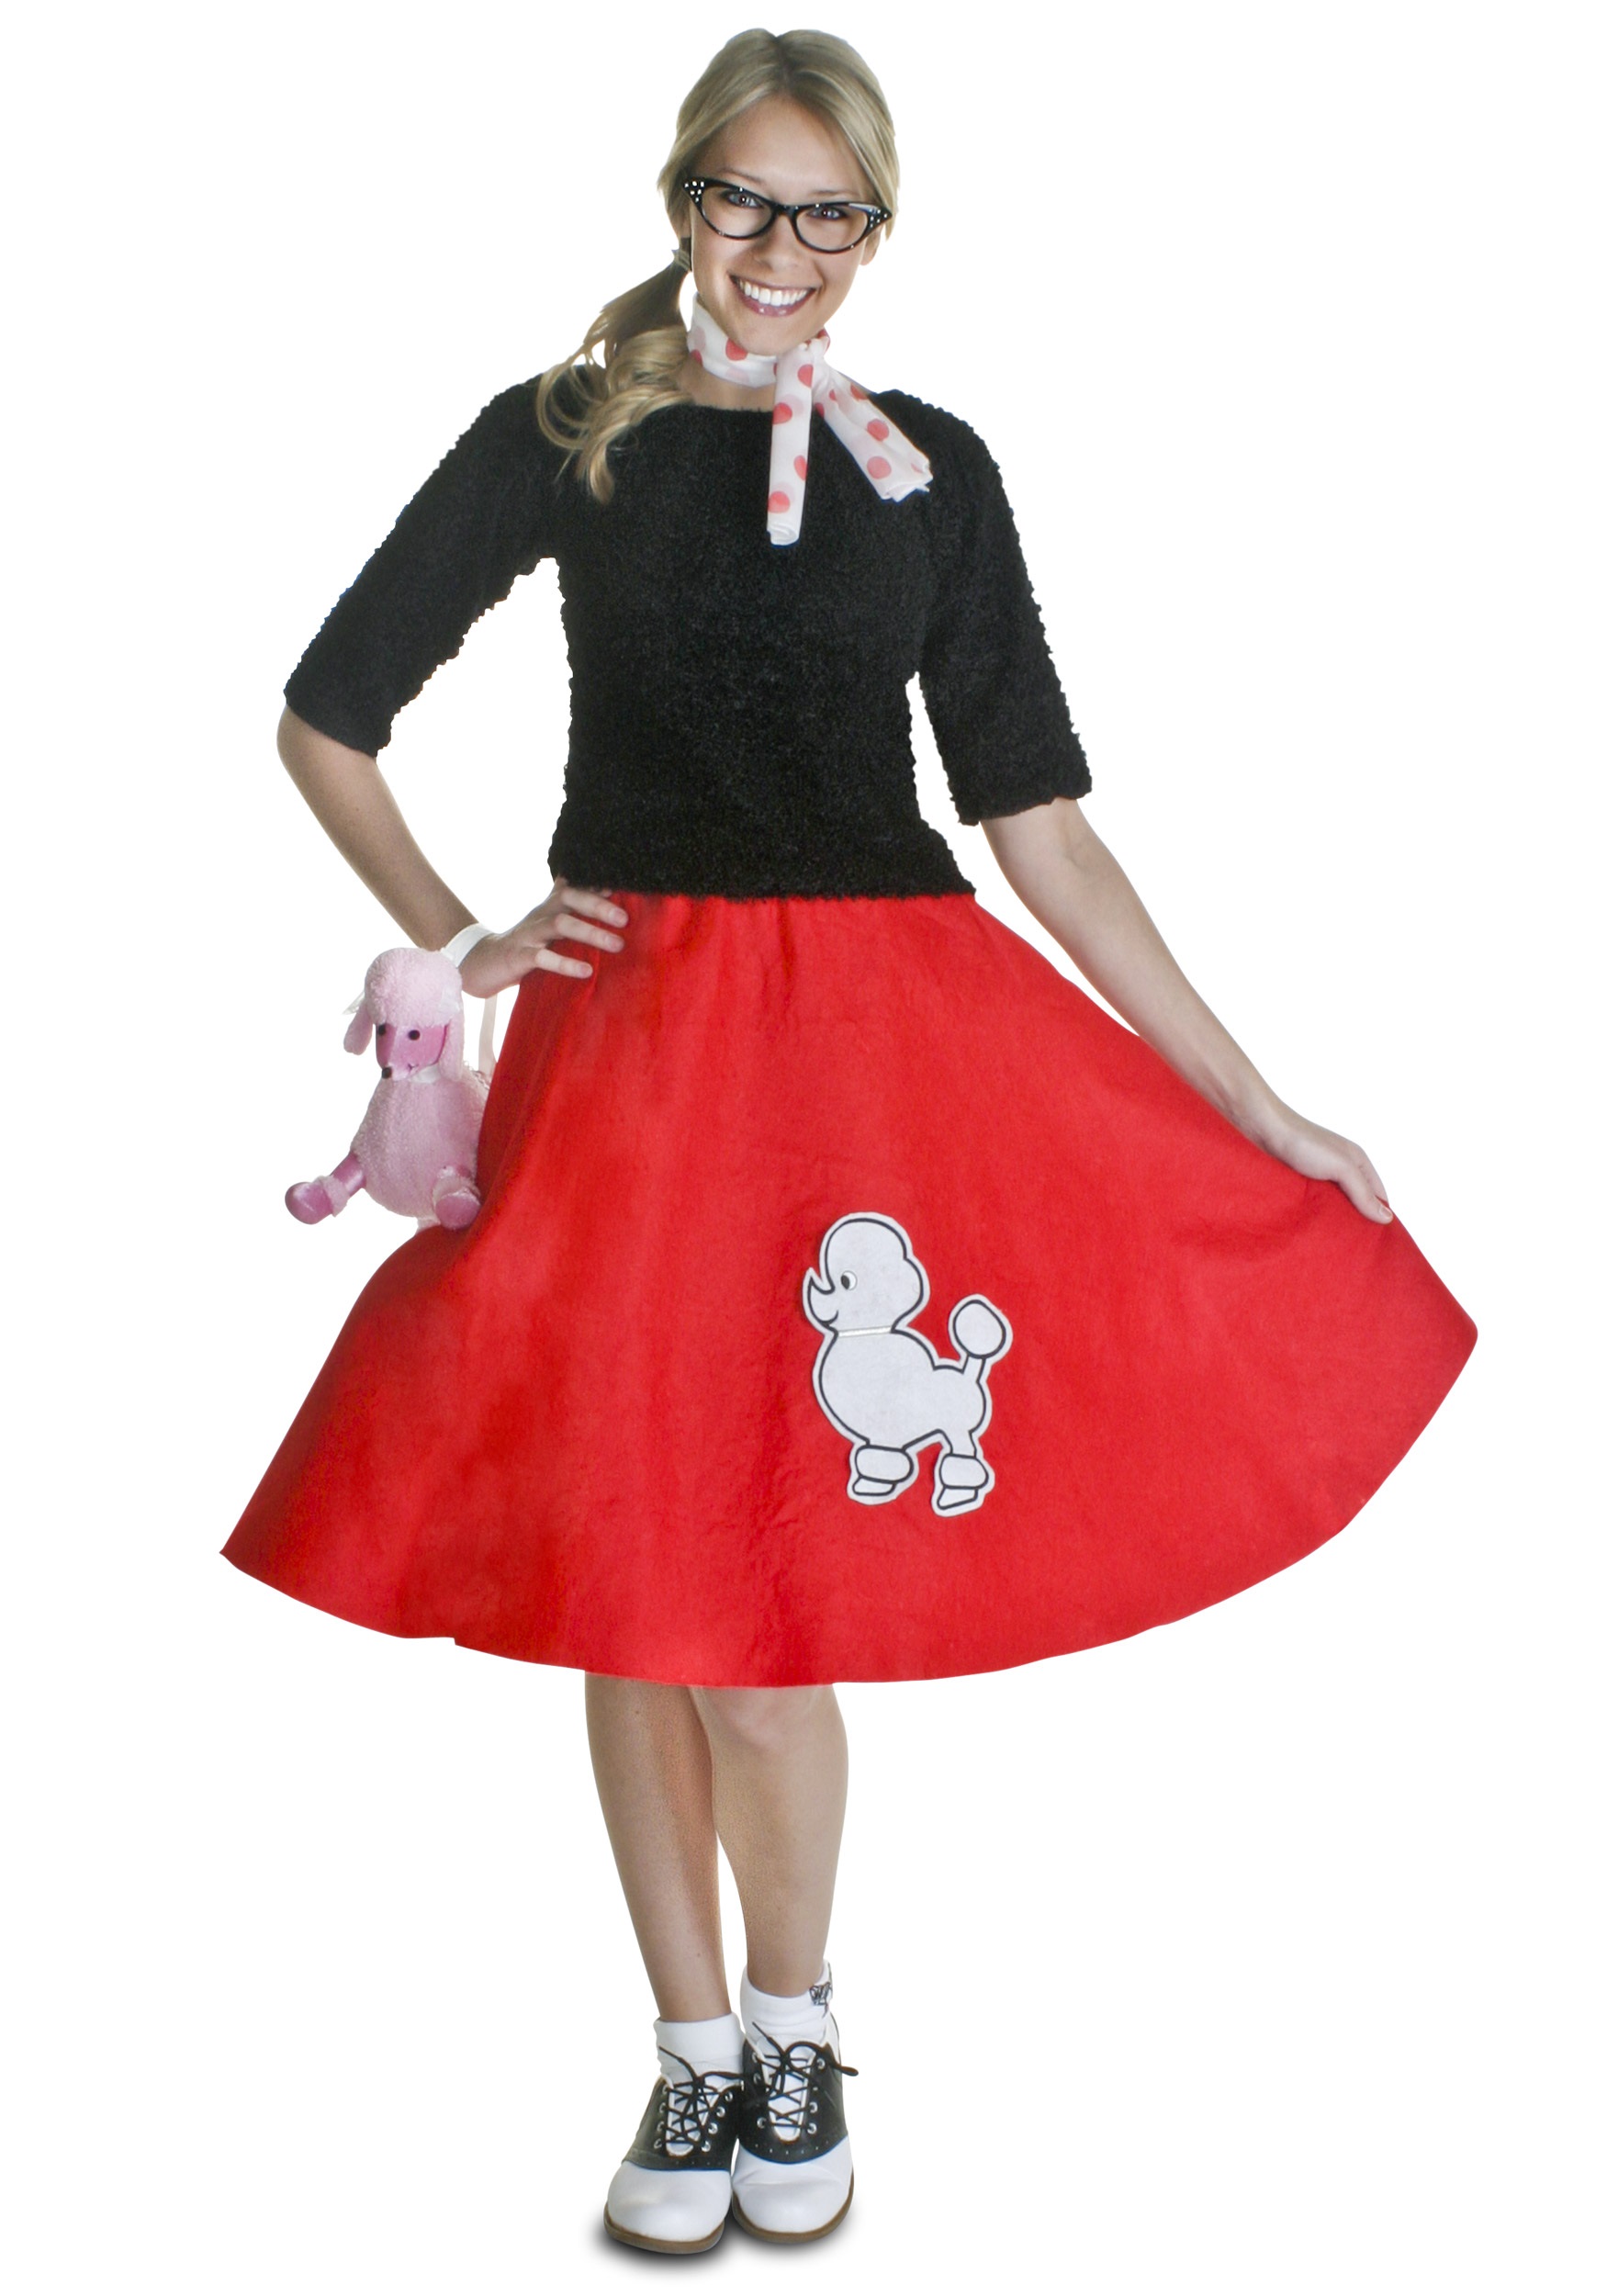 Medium 50's Red Poodle Skirt with Record Player Motif 